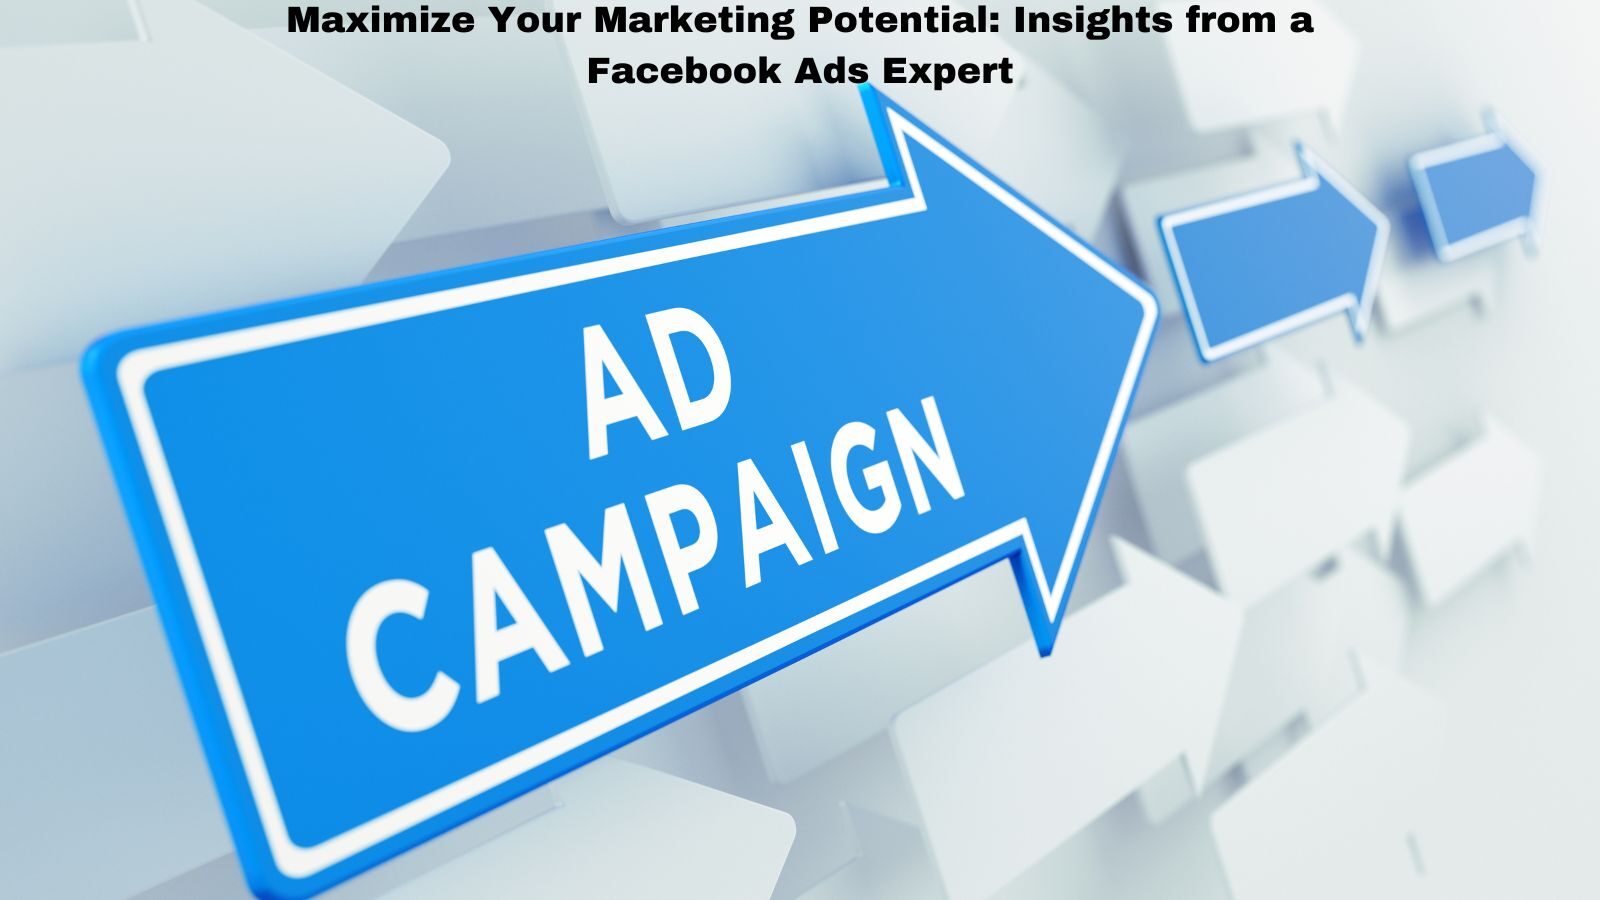 Maximize Your Marketing Potential: Insights from a Facebook Ads Expert